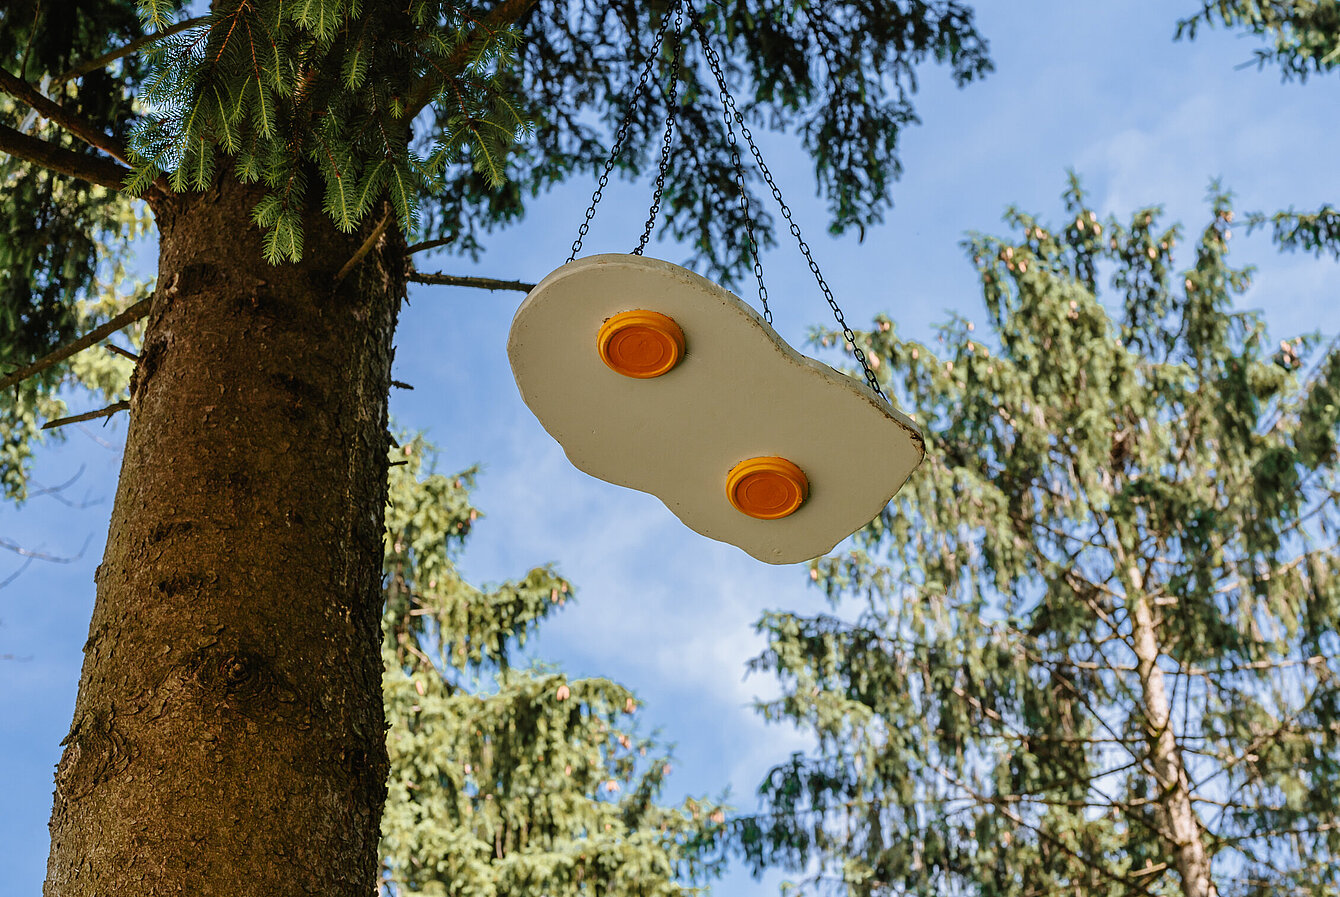 A sunny-side-up-sculpture hangs in the trees.